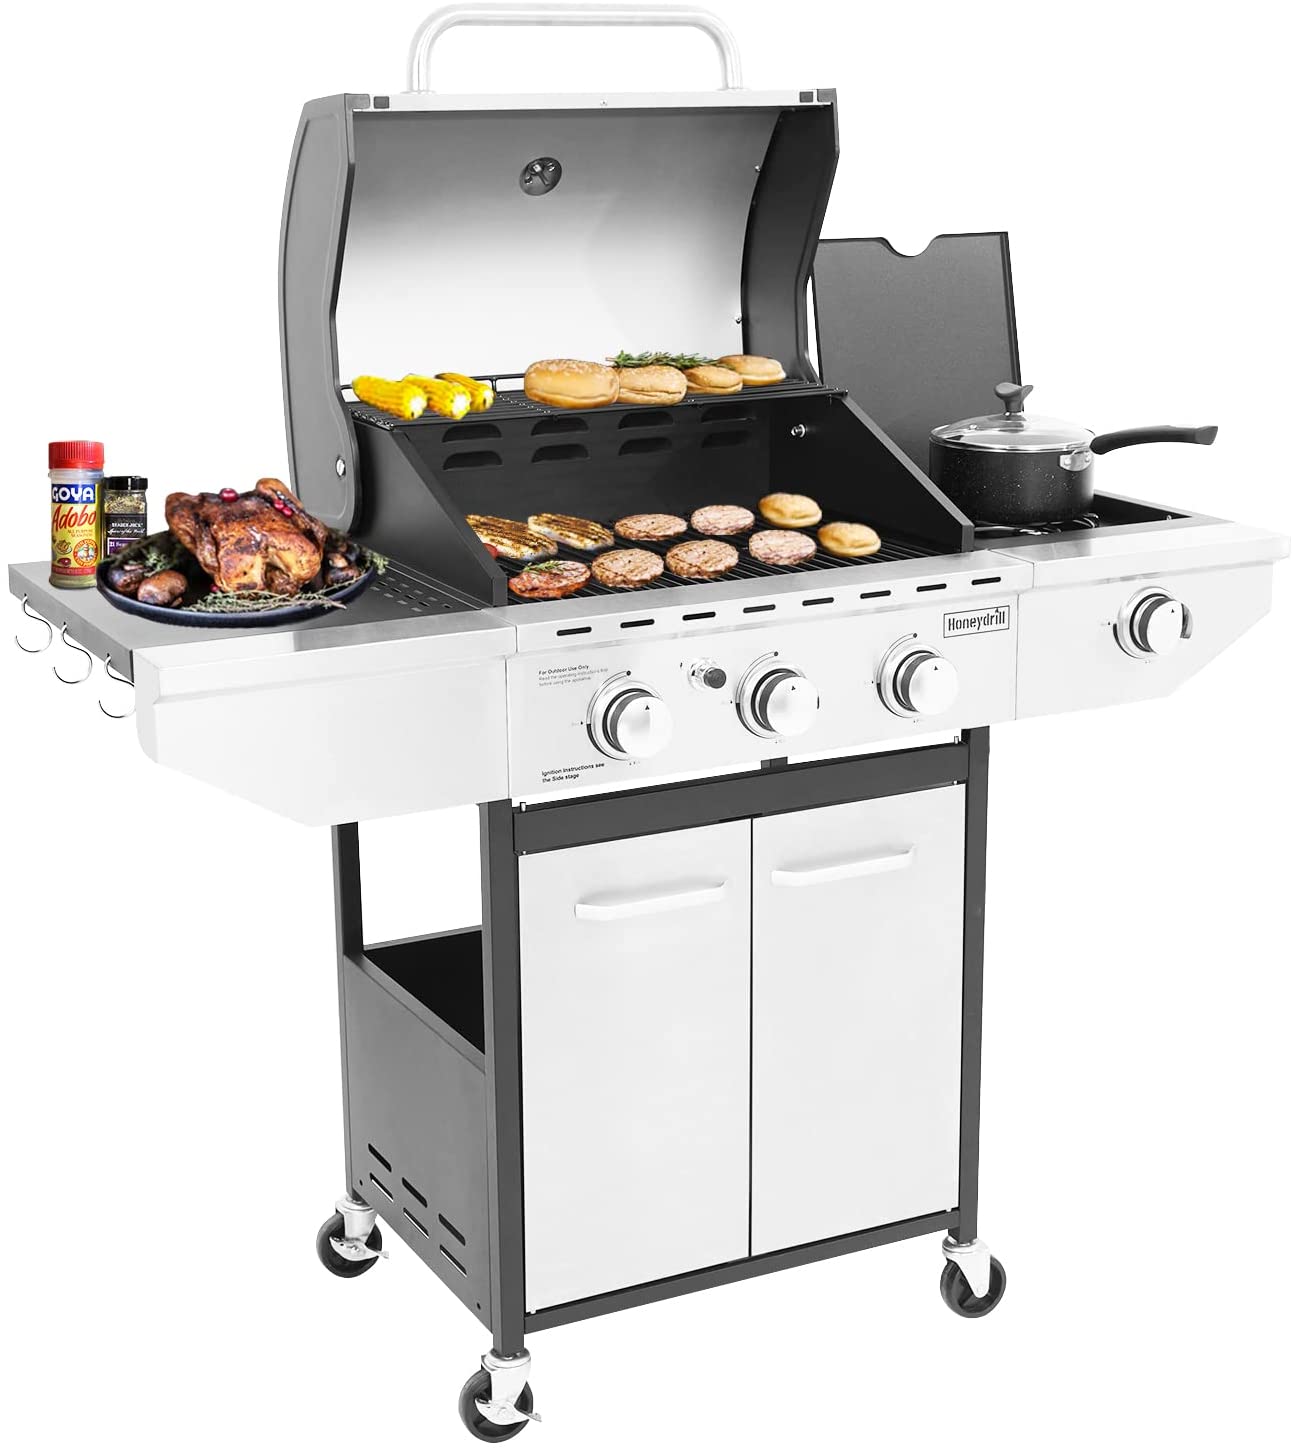 DIMAR GARDEN 3-Burner Propane Gas Grill with Side Burner, Outdoor Cabinet Grill for BBQ, Stainless Steel - image 2 of 9